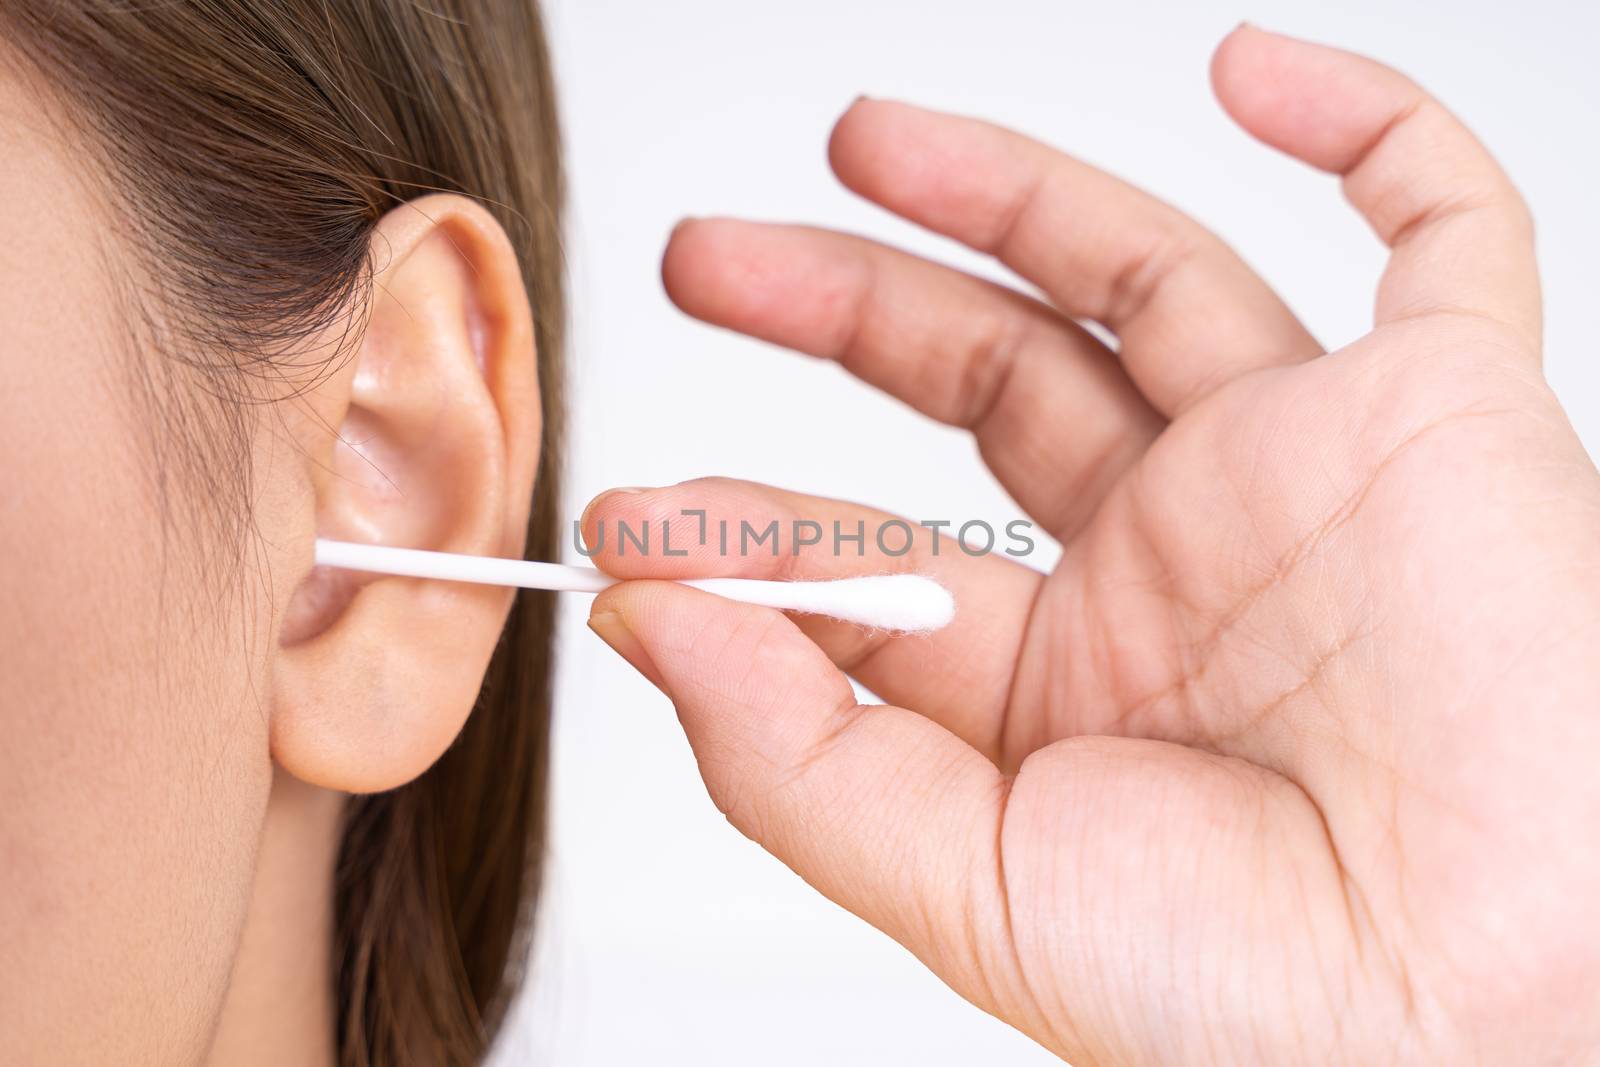 woman cleaning her ear with a cotton swab. A woman suffered an infection after using the sticks incorrectly. by mikesaran